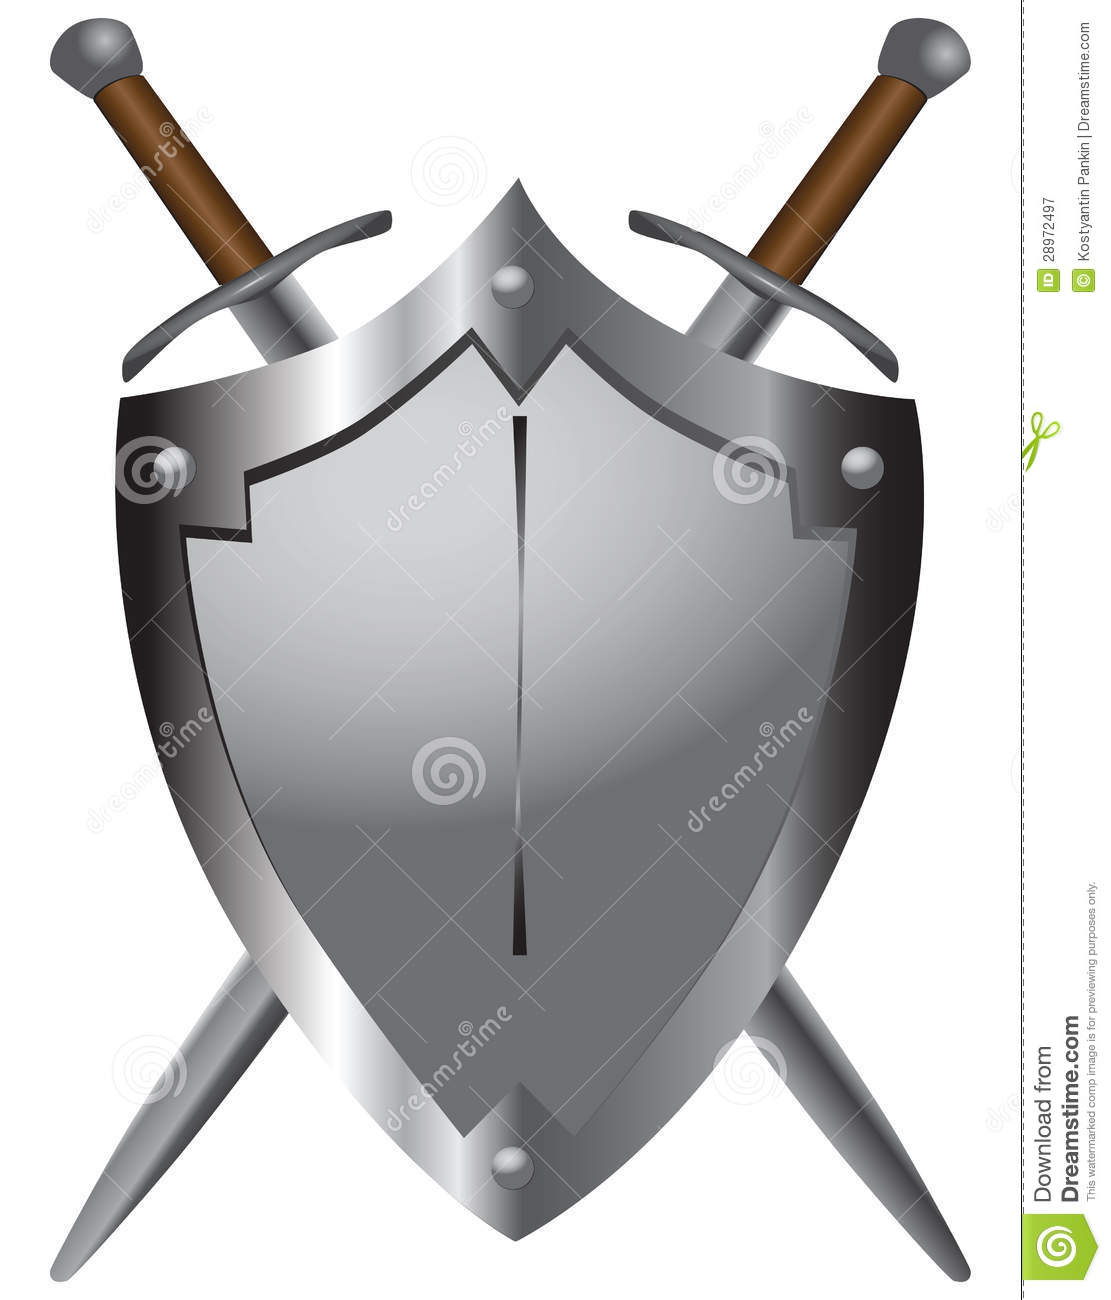 Medieval Swords With Shield Royalty Free Stock Photography   Image